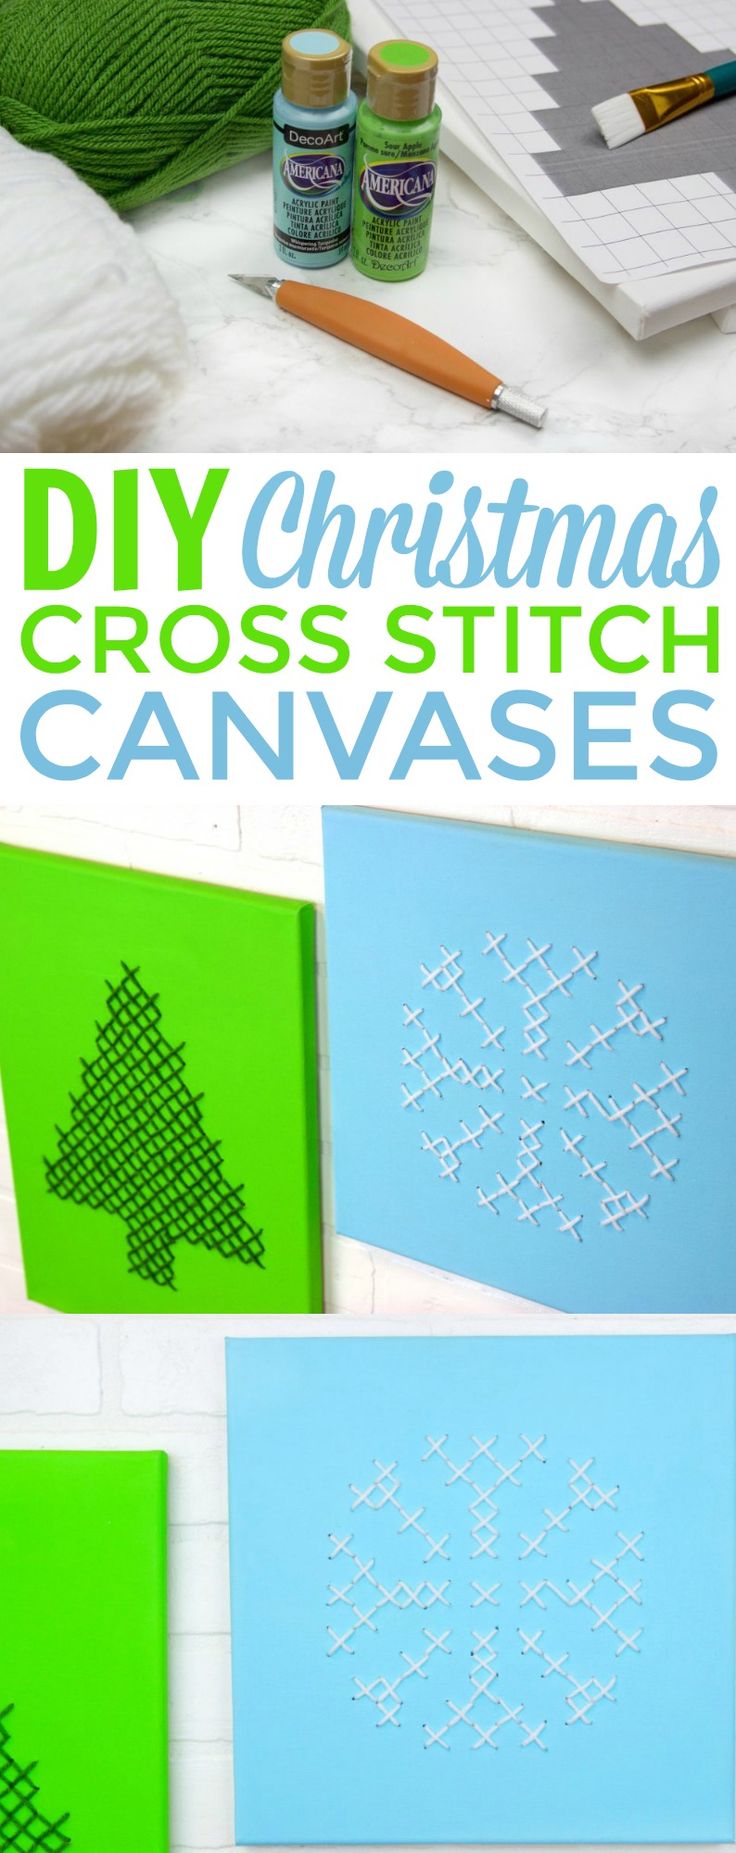 These DIY Christmas Cross Stitch Canvases are the perfect festive Christmas deco...